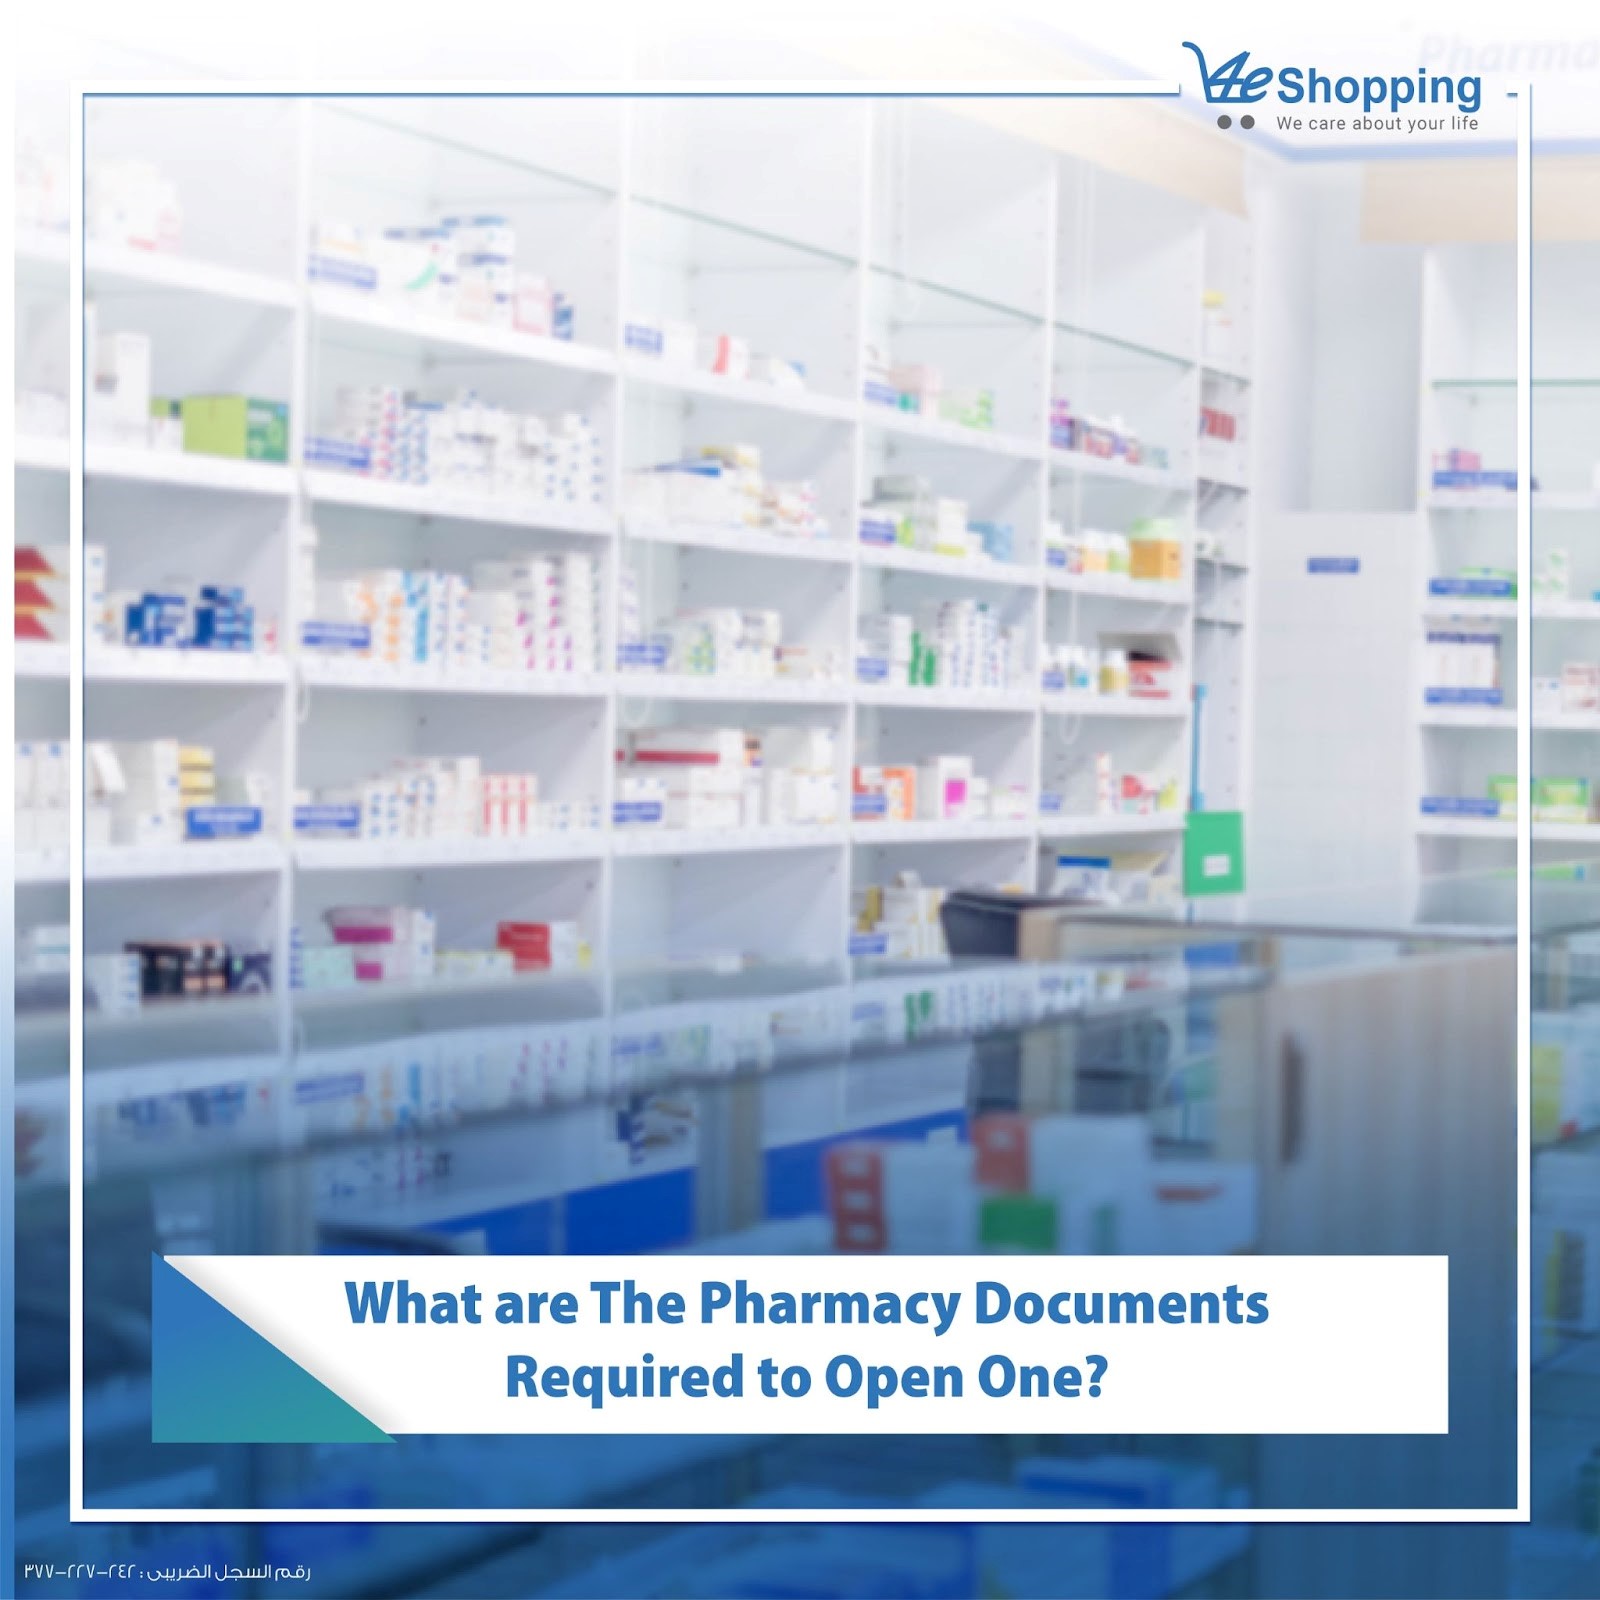 What are the pharmacy documents required to open one?